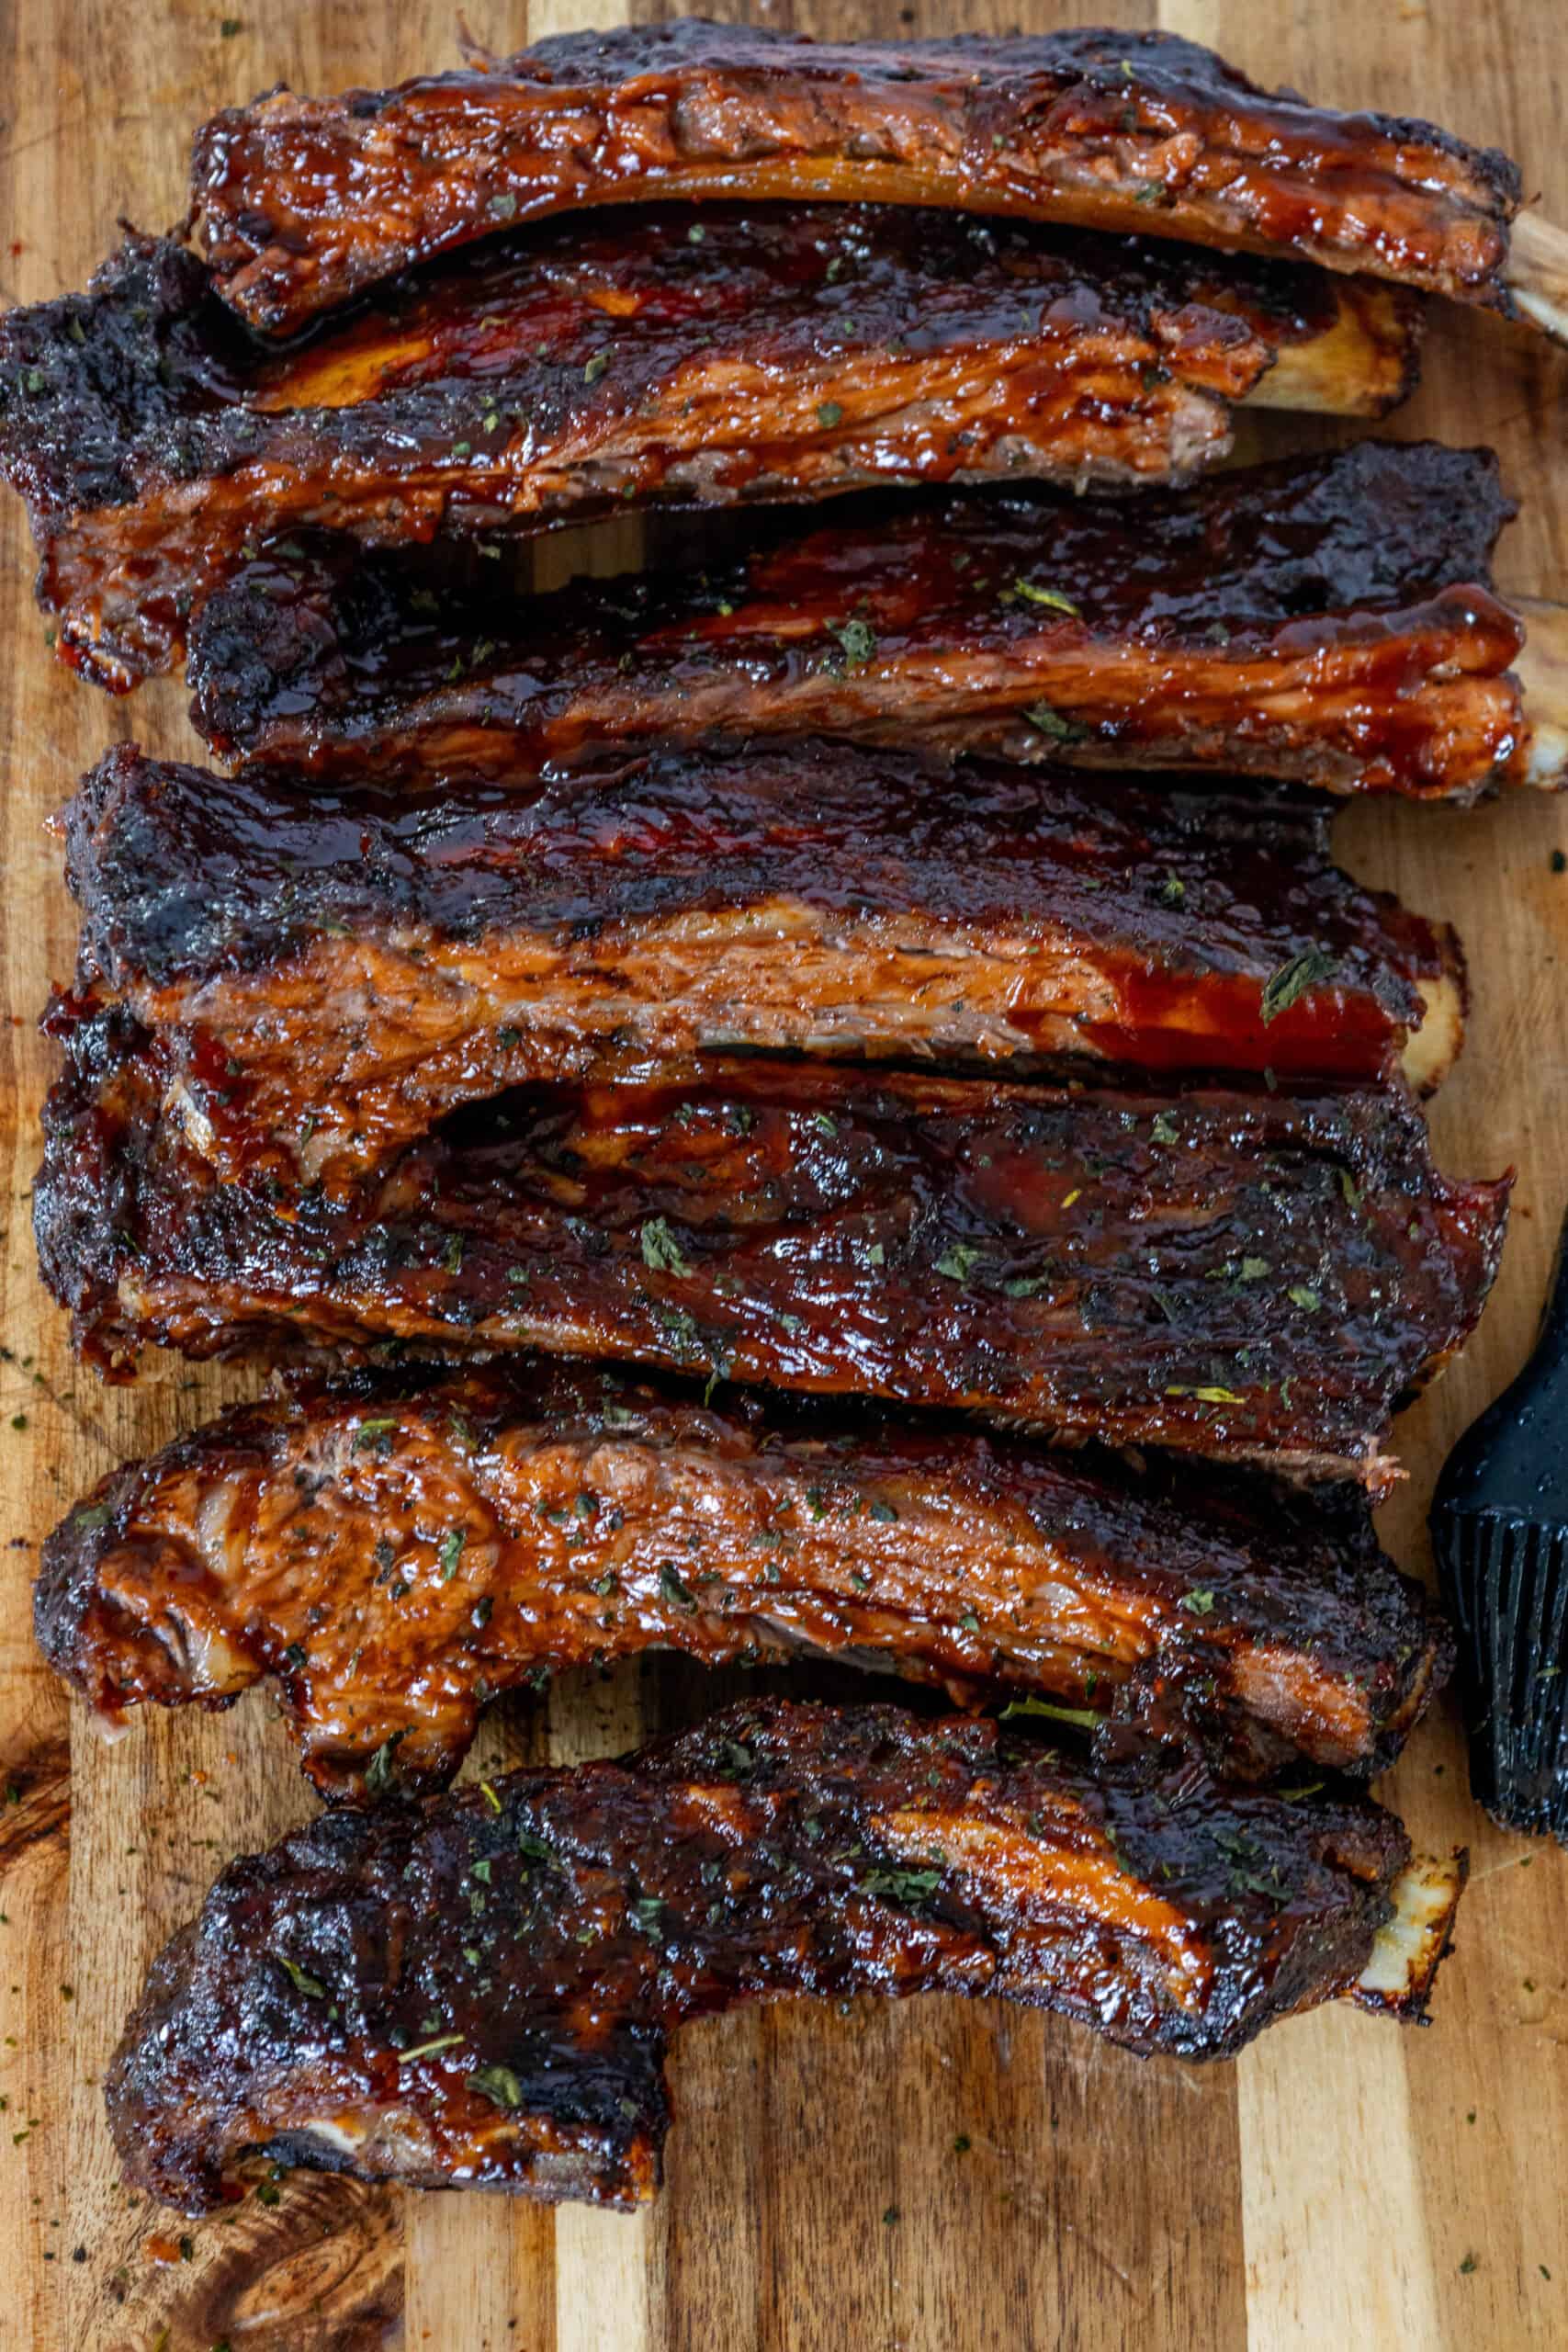 Oven baked BBQ beef ribs on a wooden cutting board.